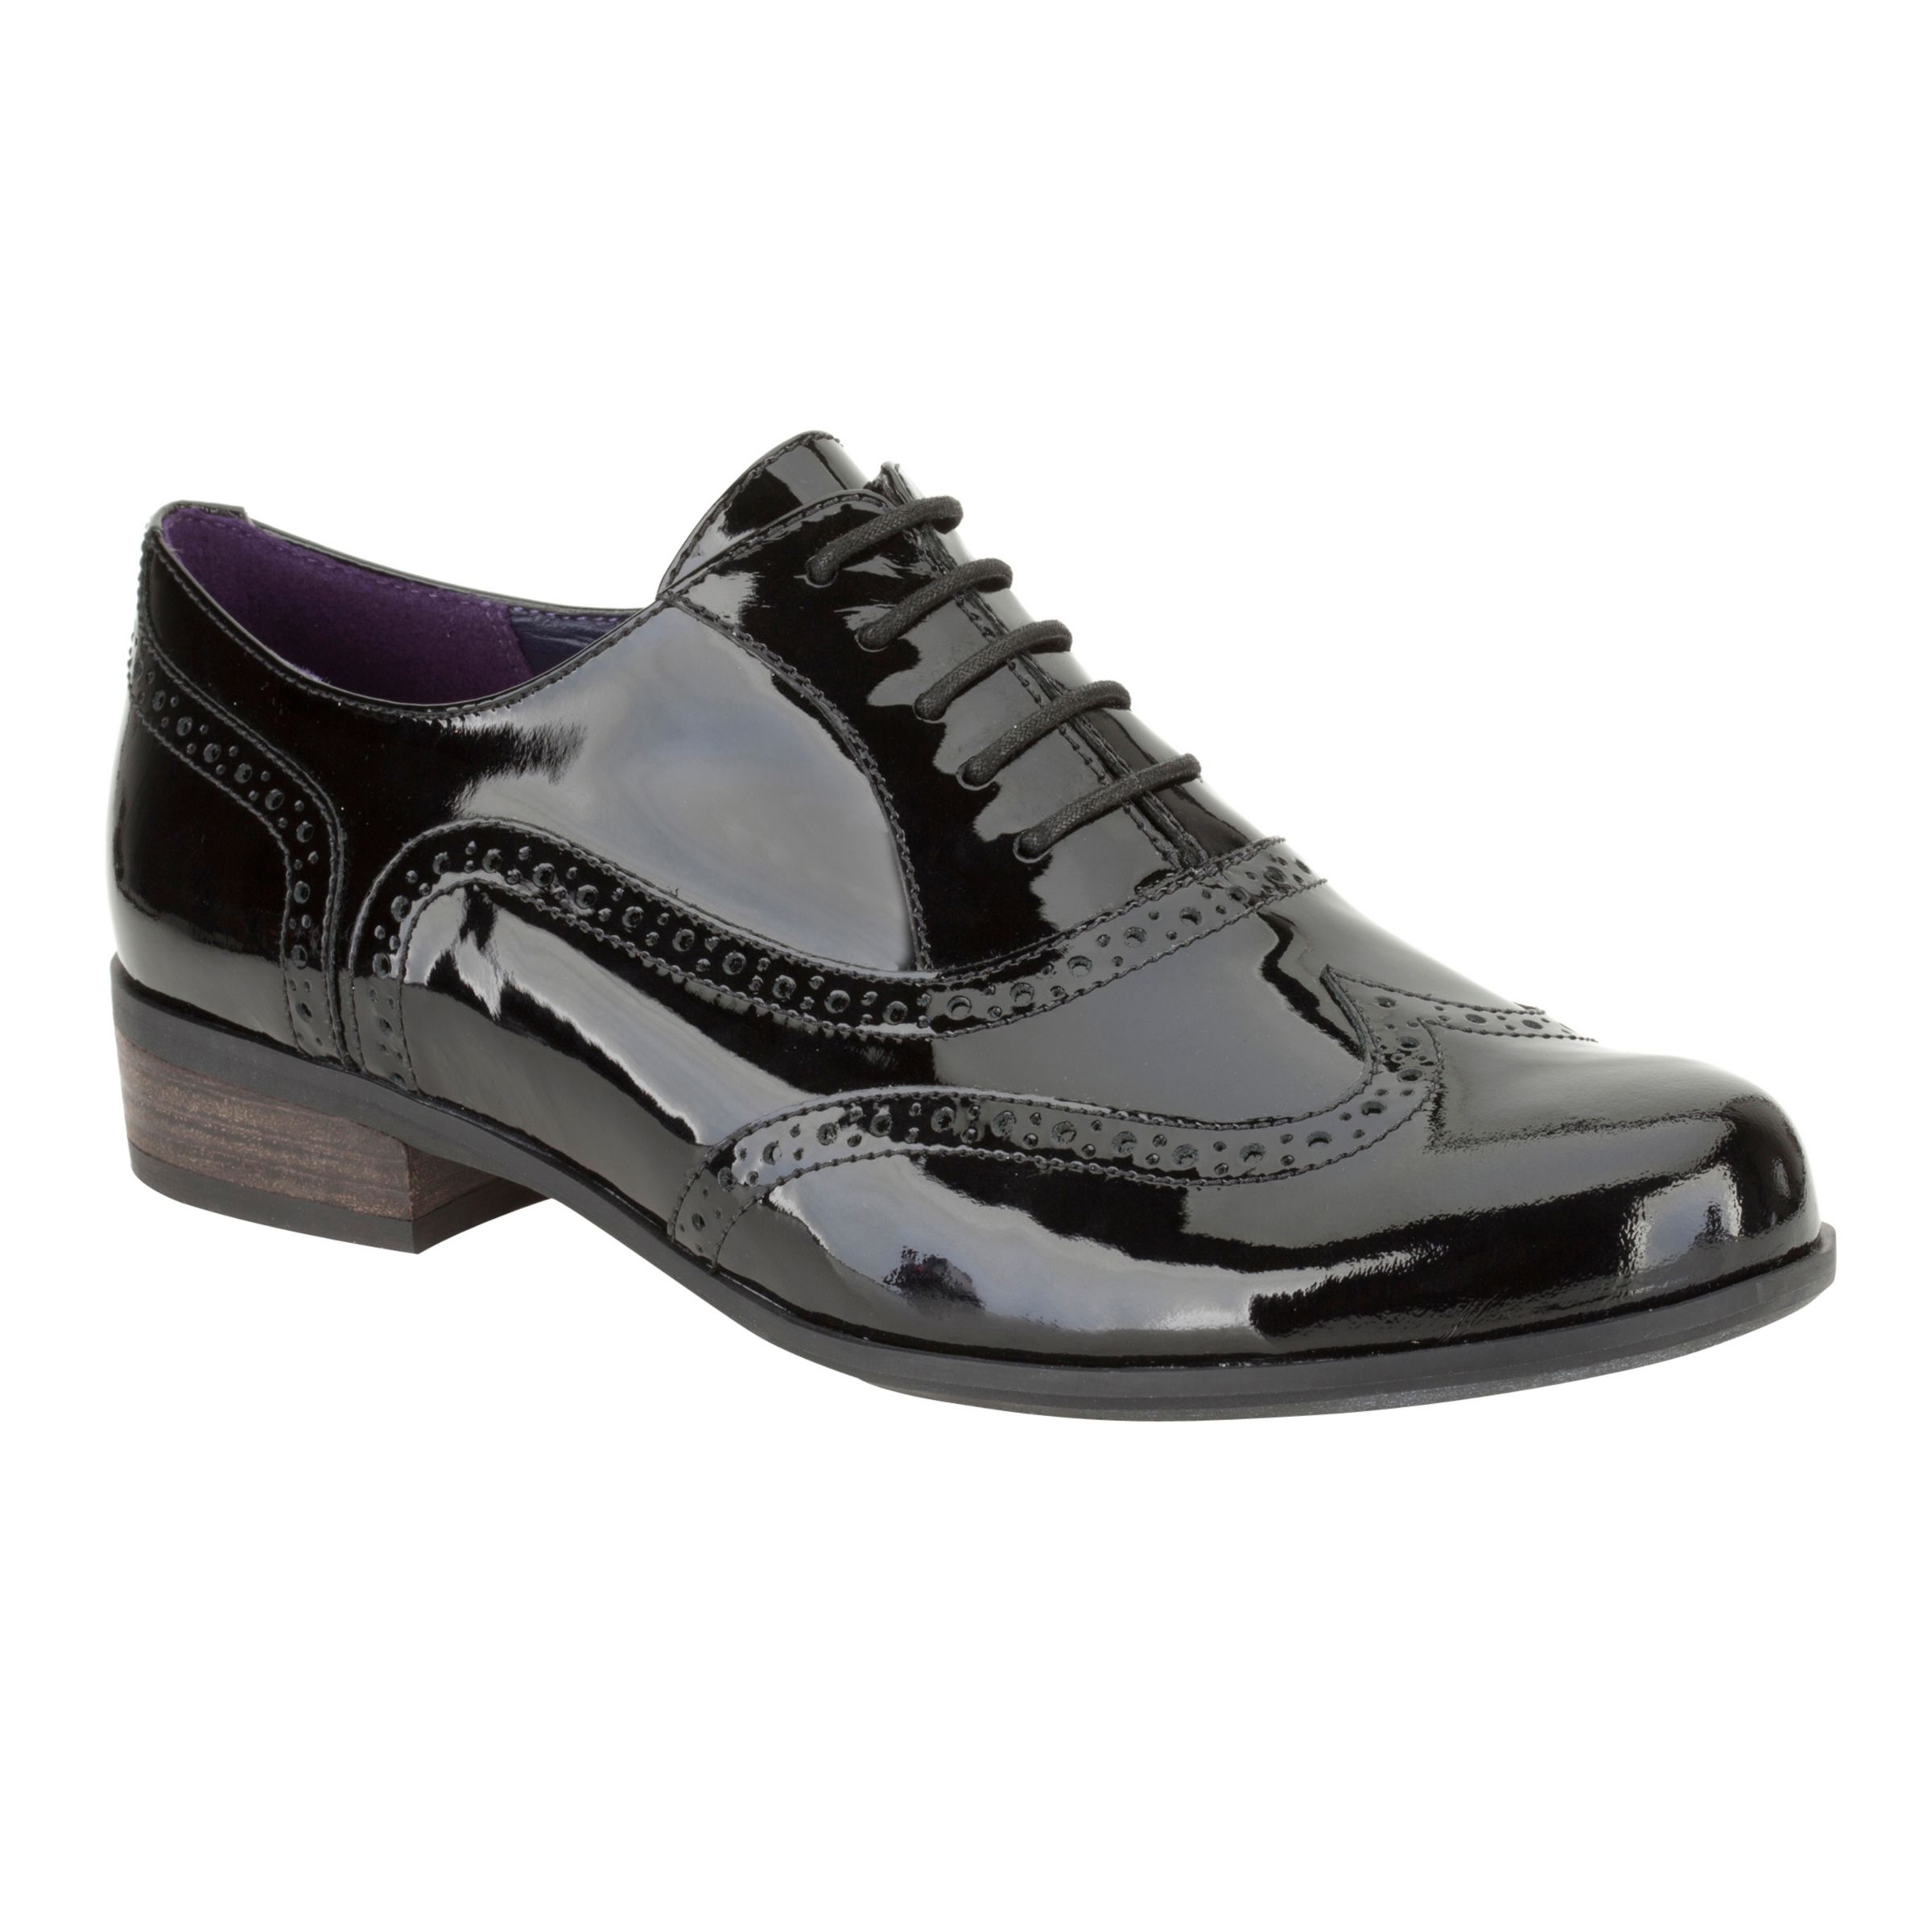 clarks hamble patent leather brogue shoes